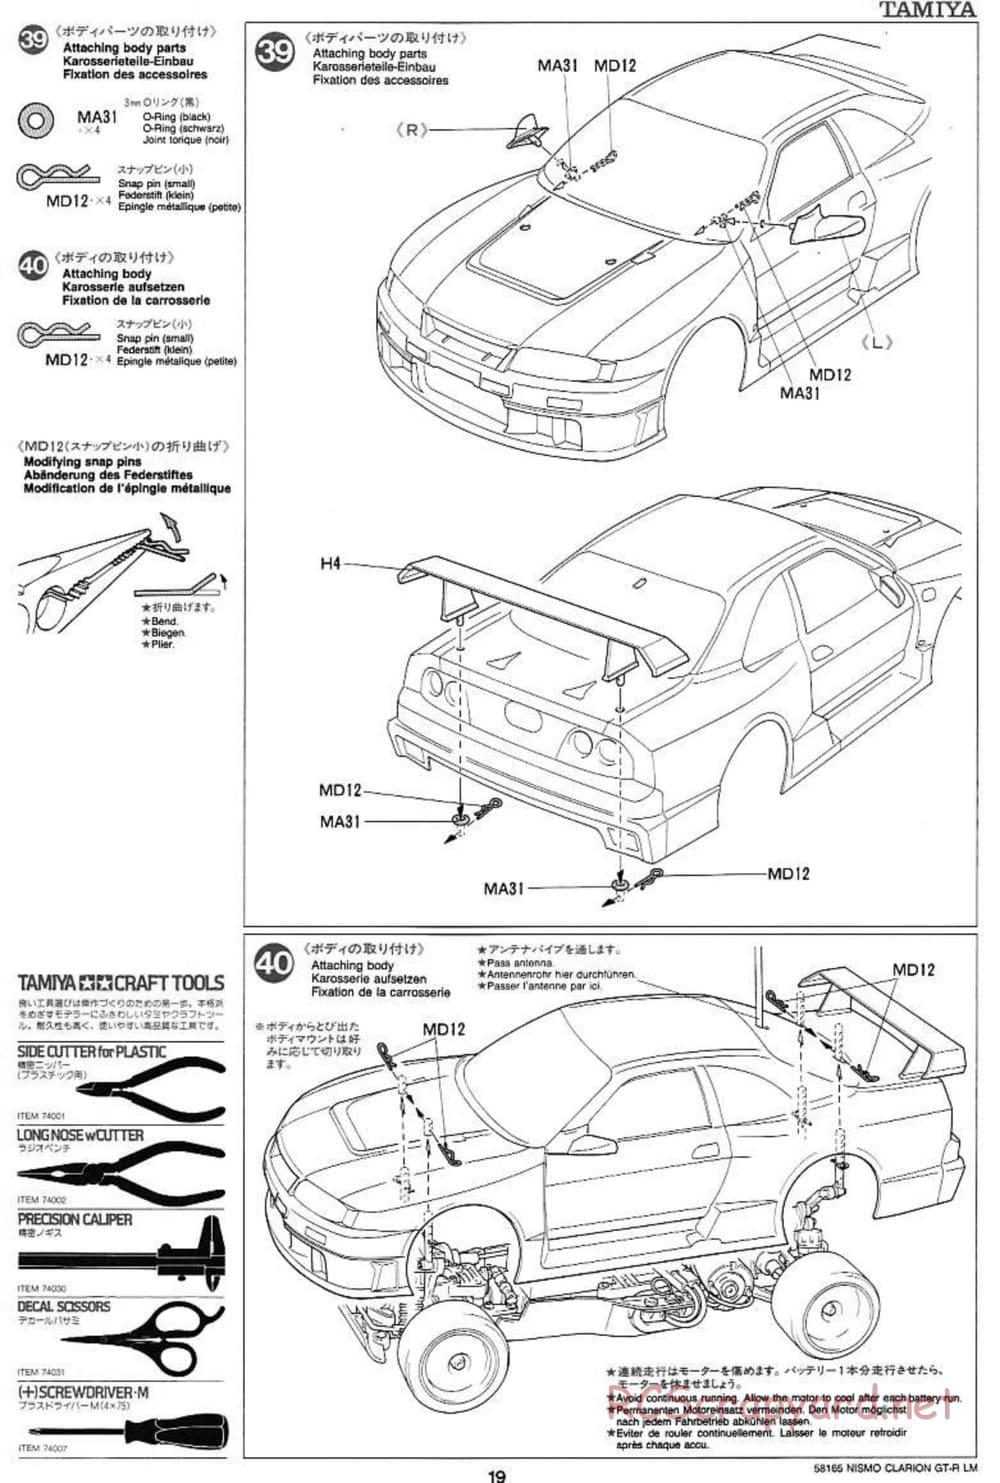 Tamiya - Nismo Clarion GT-R LM - TA-02W Chassis - Manual - Page 19